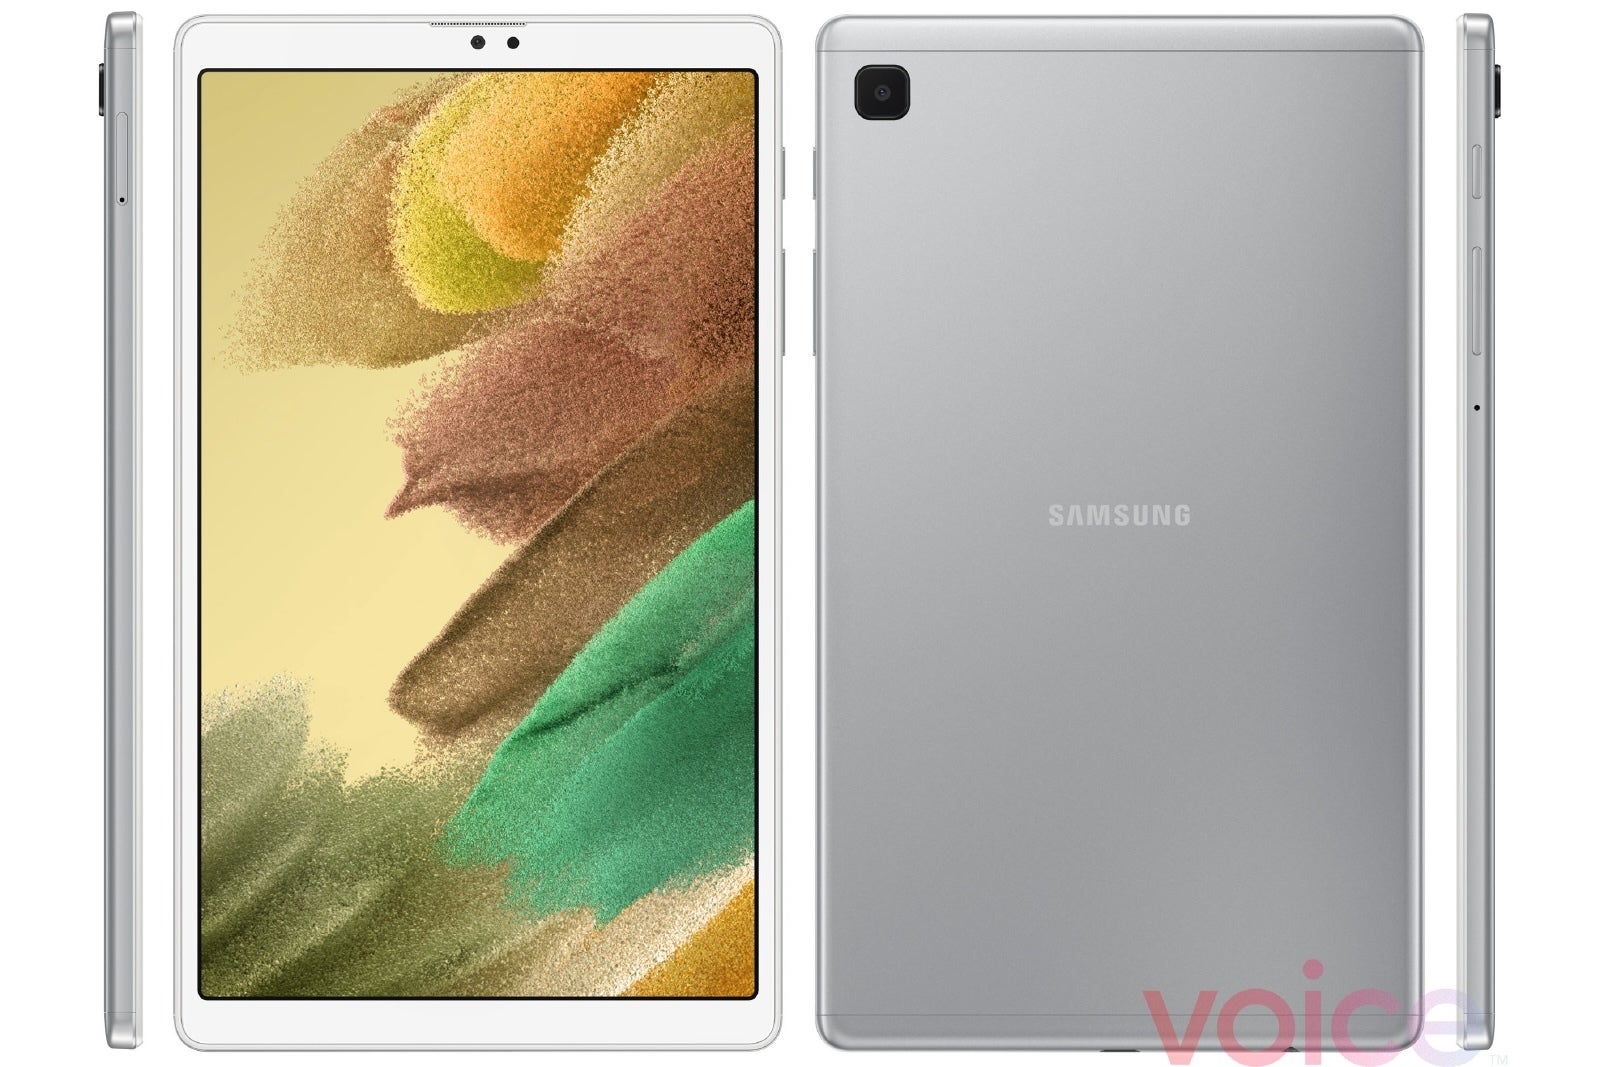 Affordable Galaxy Tab A7 Lite Android tablet leaks again in two colors